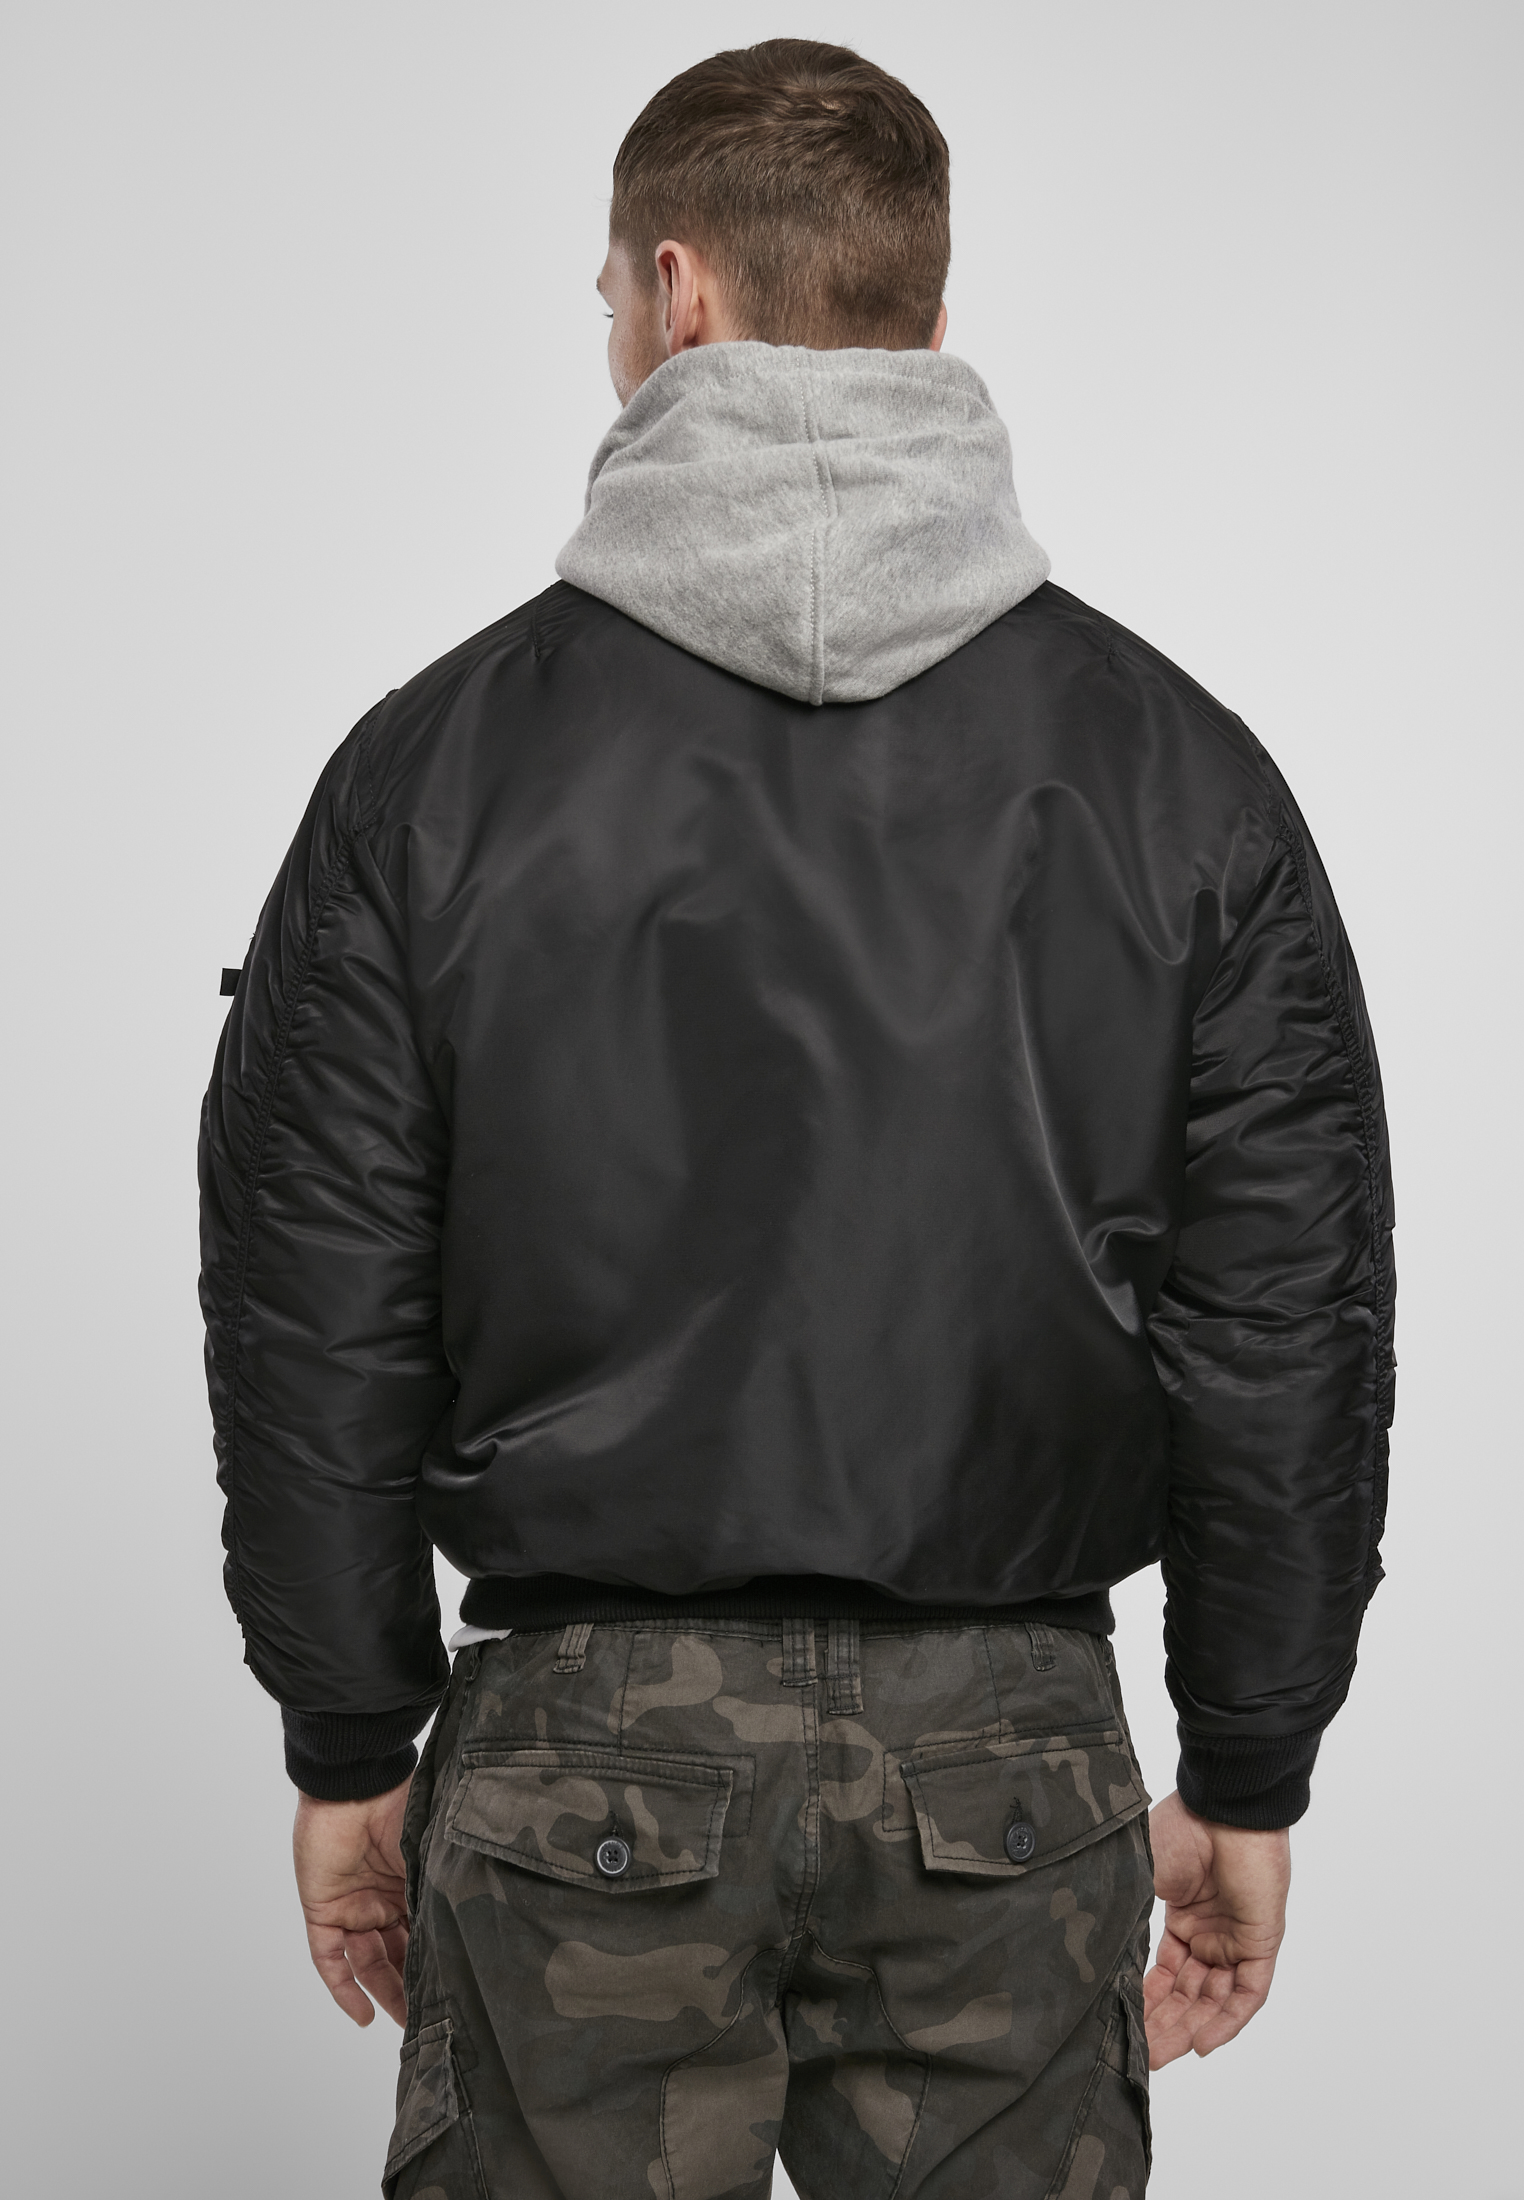 Jacken Hooded MA1 Bomber Jacket in Farbe blk/gry